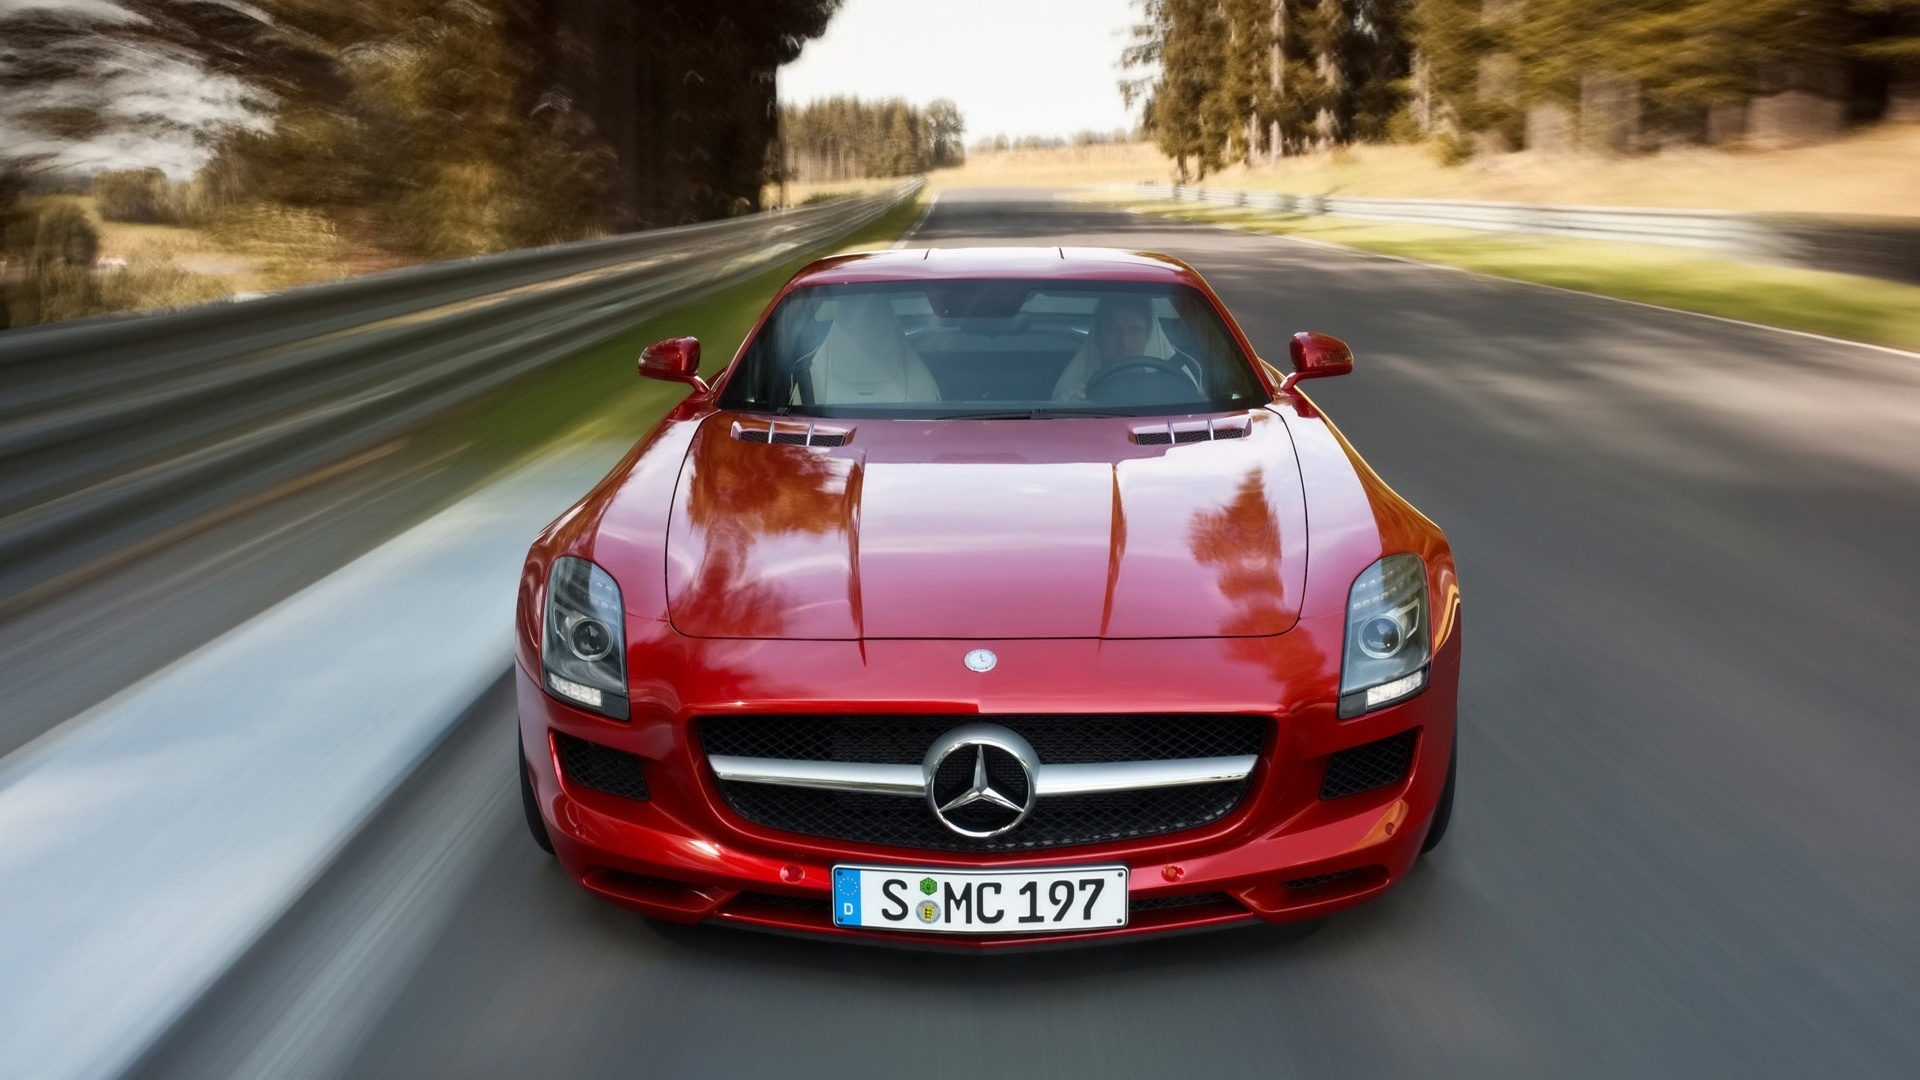 Mercedes-Benz SLS AMG Red 2010 for 1920 x 1080 HDTV 1080p resolution